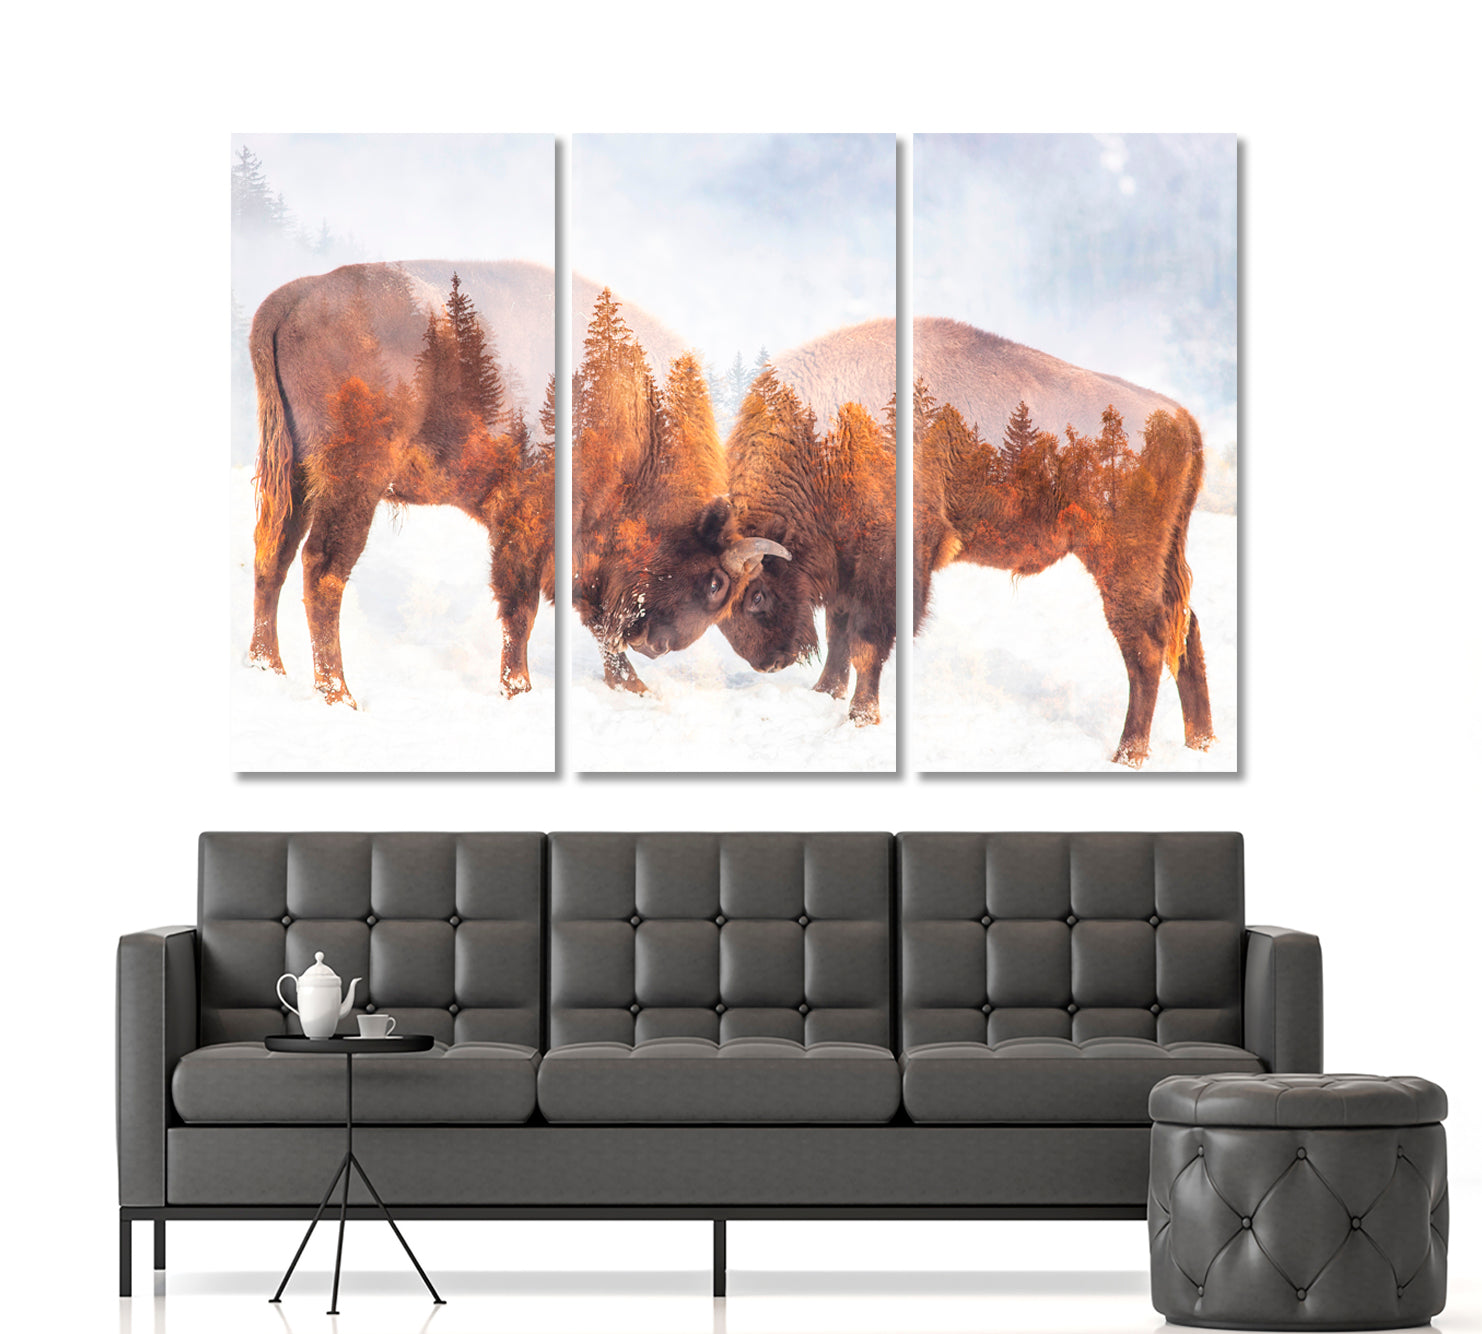 Double Exposure Two Wild Bison Fighting And Pine Trees Wild Life Framed Art Artesty 3 panels 36" x 24" 